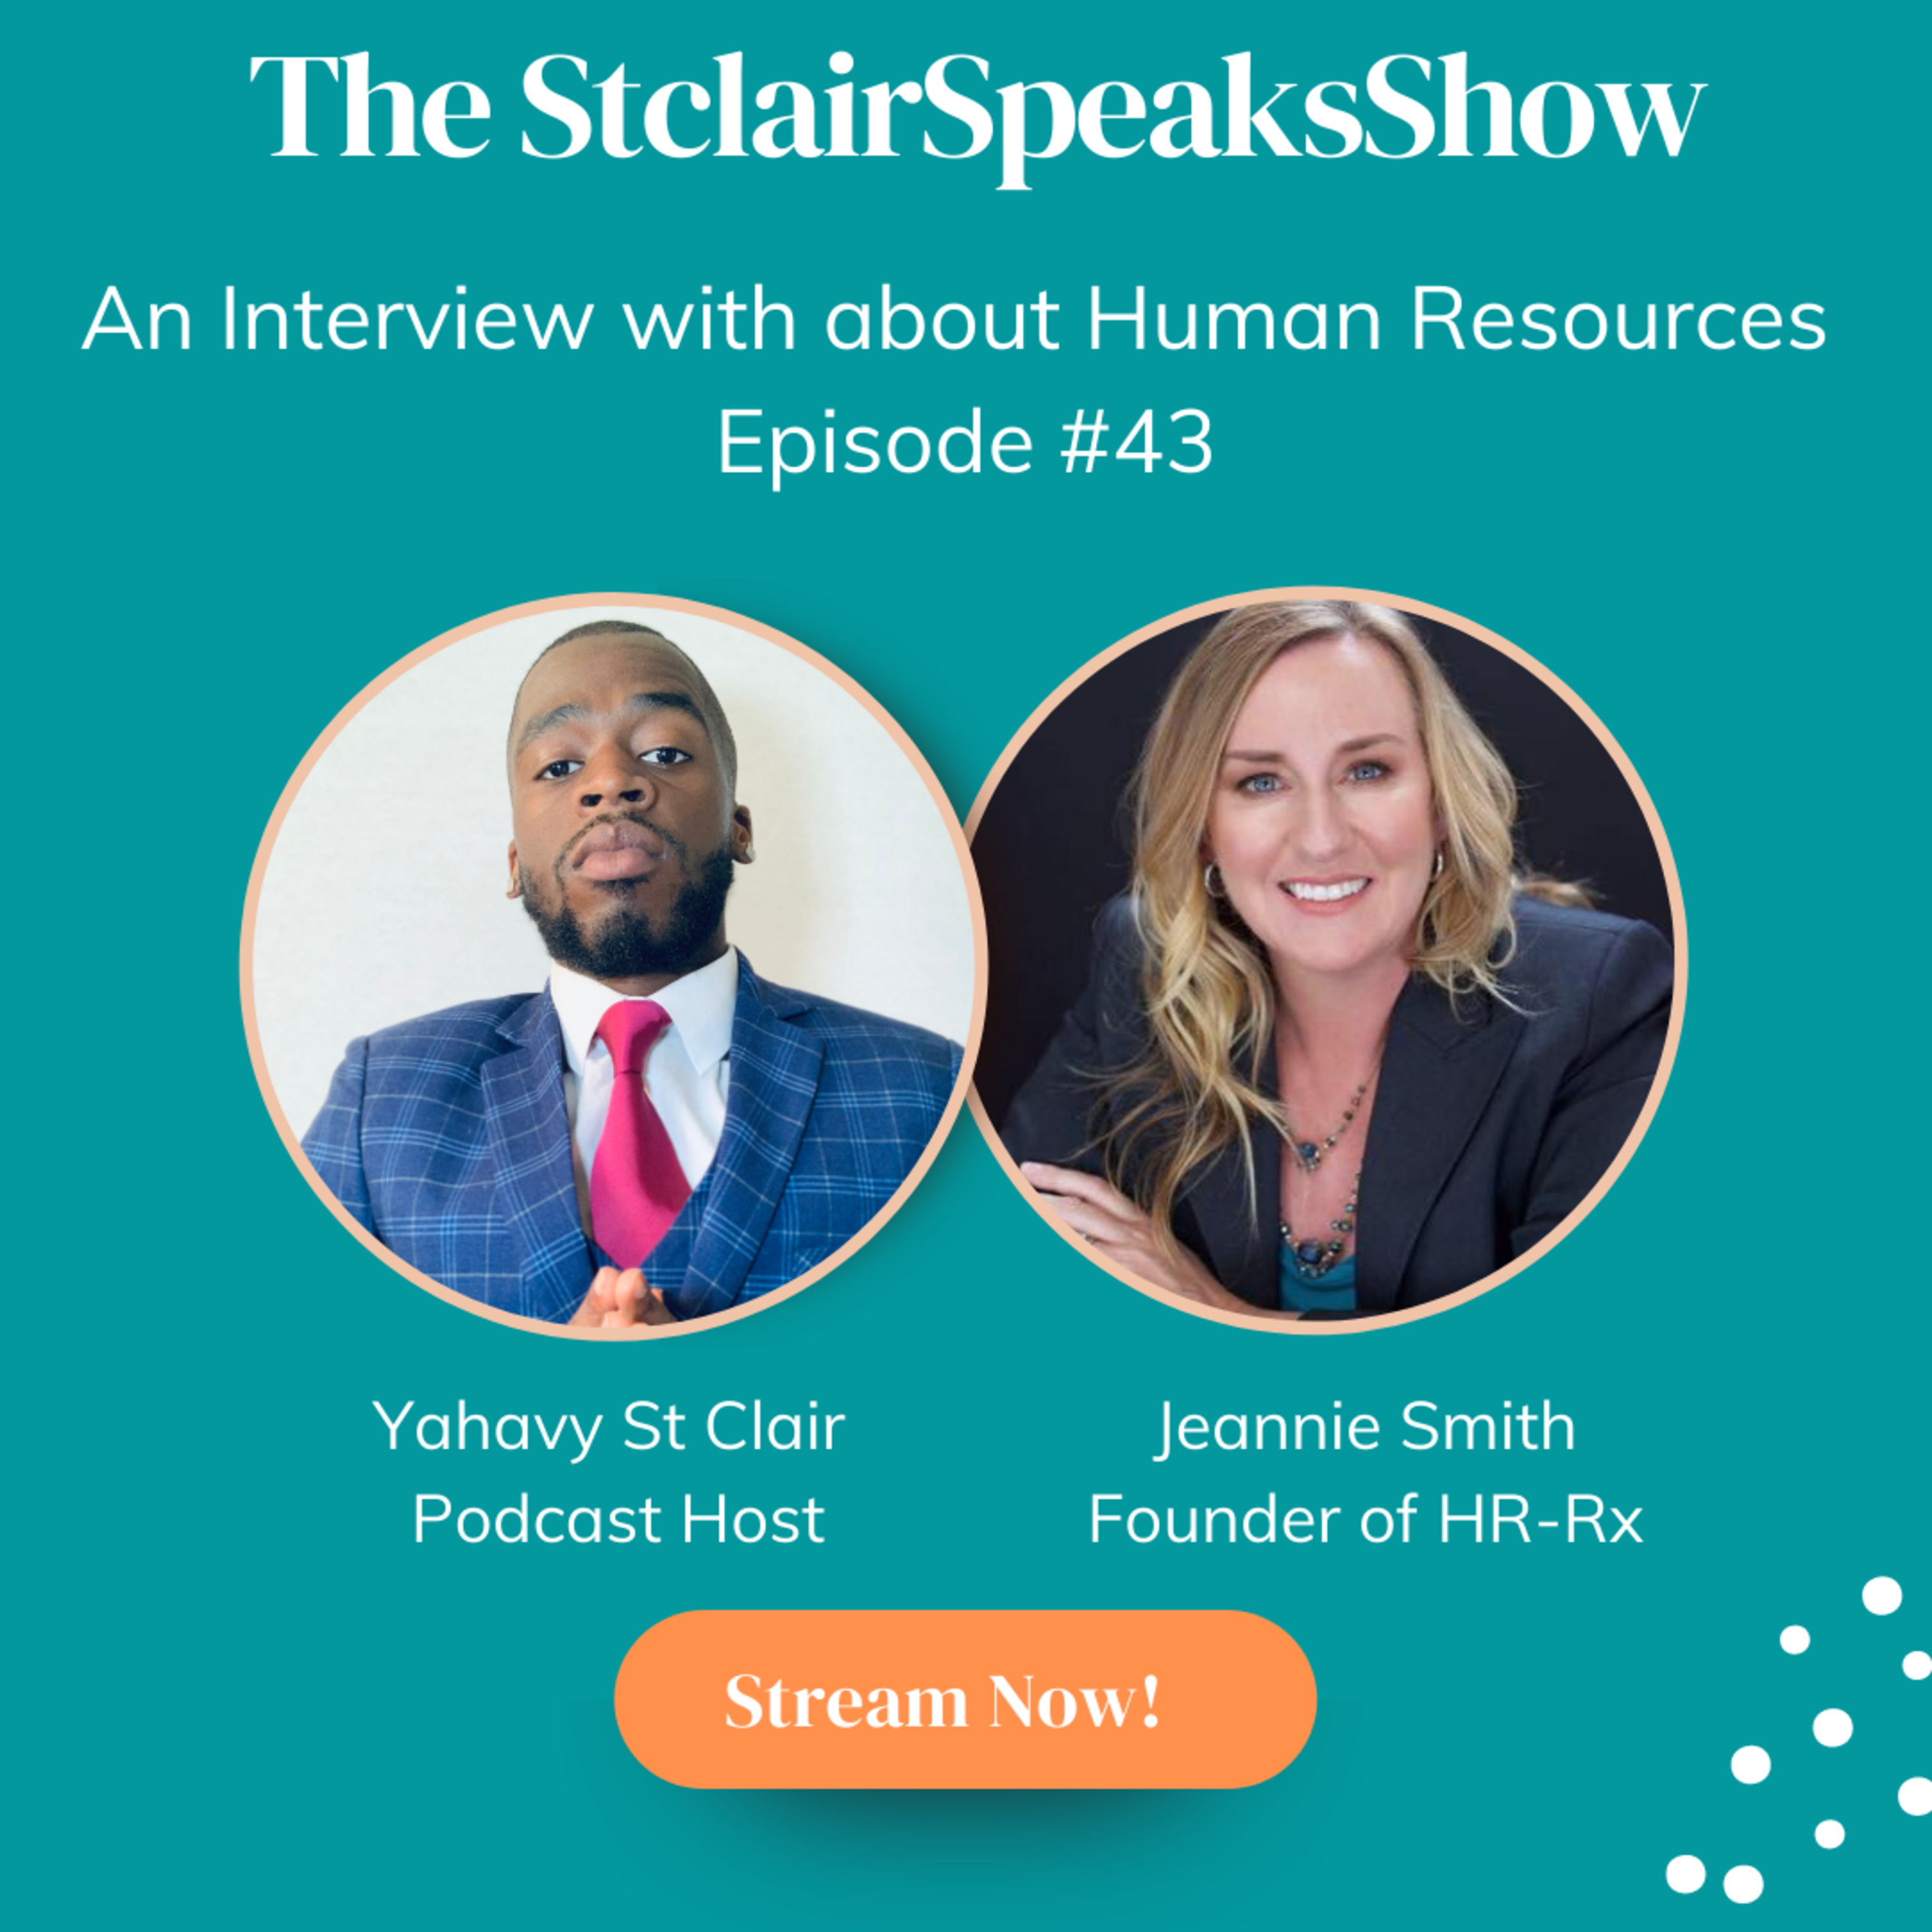 The StclairSpeaksShow Podcast Featuring Jeannie Smith founder of HR-Rx Episode #43 Image